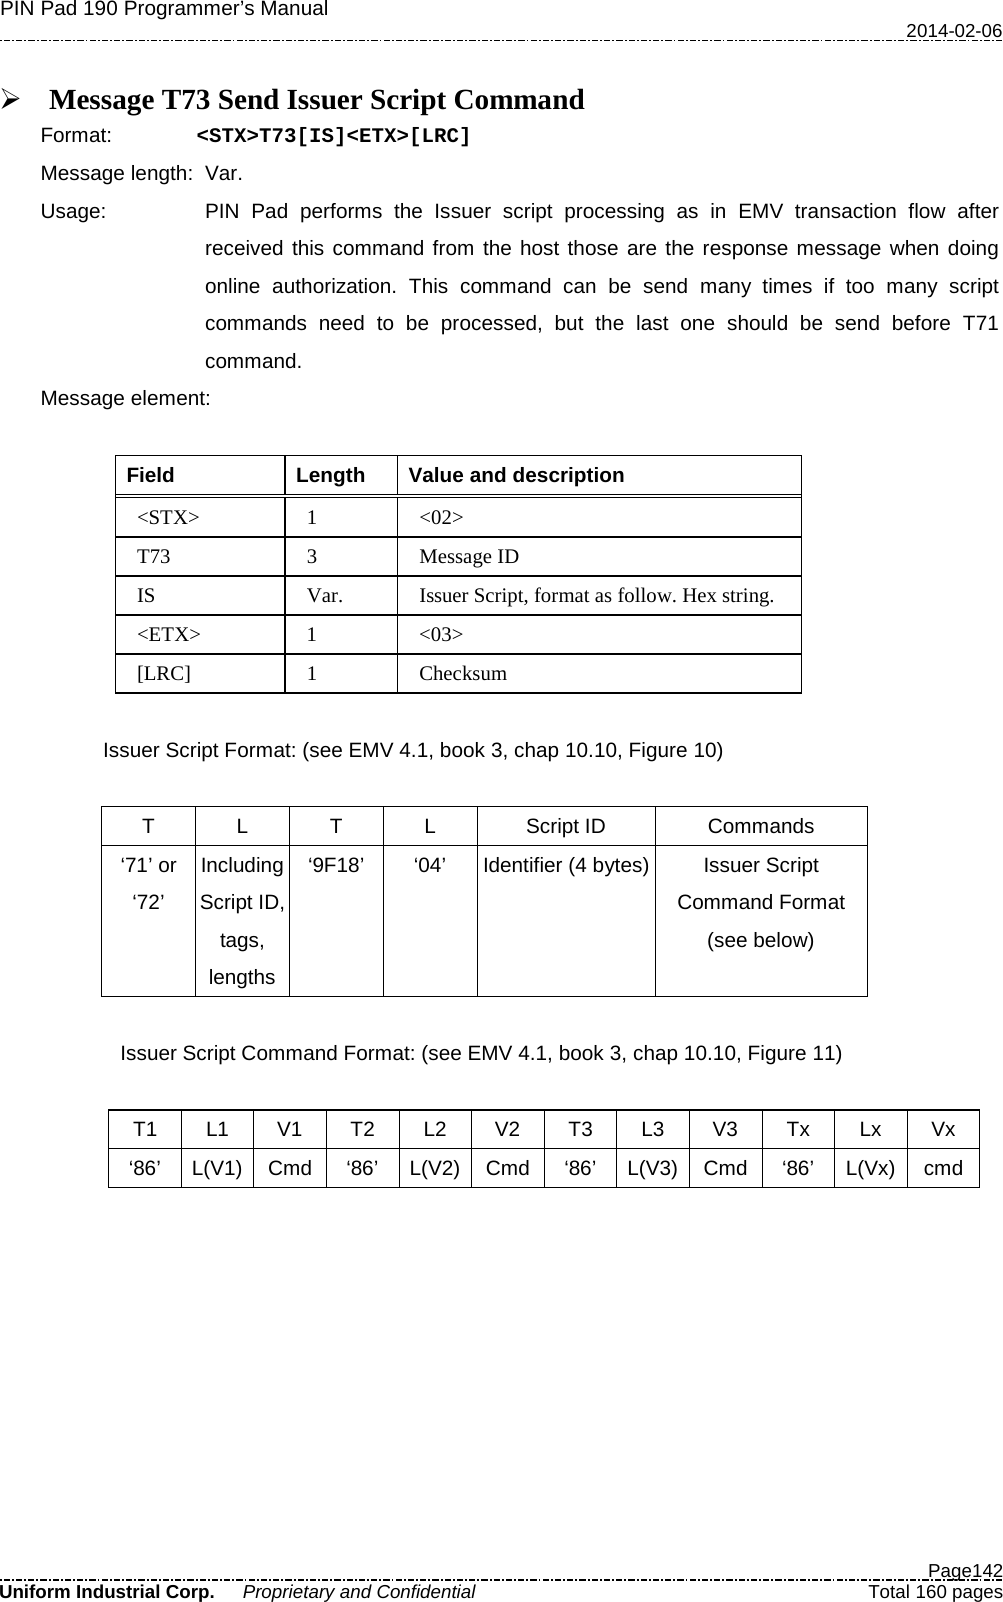 PIN Pad 190 Programmer’s Manual   2014-02-06  Page142 Uniform Industrial Corp. Proprietary and Confidential  Total 160 pages   Message T73 Send Issuer Script Command Format:   &lt;STX&gt;T73[IS]&lt;ETX&gt;[LRC] Message length: Var. Usage: PIN Pad performs the Issuer script processing as in EMV transaction flow after received this command from the host those are the response message when doing online authorization. This command can be send many times if too many script commands need to be processed, but the last one should be send before T71 command.   Message element:       Issuer Script Format: (see EMV 4.1, book 3, chap 10.10, Figure 10)    T  L  T  L  Script ID Commands ‘71’ or ‘72’ Including Script ID, tags, lengths ‘9F18’  ‘04’  Identifier (4 bytes) Issuer Script Command Format (see below)   Issuer Script Command Format: (see EMV 4.1, book 3, chap 10.10, Figure 11)    T1 L1 V1 T2 L2 V2 T3 L3 V3 Tx Lx Vx ‘86’  L(V1) Cmd  ‘86’  L(V2) Cmd  ‘86’  L(V3) Cmd  ‘86’  L(Vx) cmd  Field  Length  Value and description &lt;STX&gt;  1  &lt;02&gt; T73  3  Message ID IS Var. Issuer Script, format as follow. Hex string. &lt;ETX&gt;  1  &lt;03&gt; [LRC]  1  Checksum 